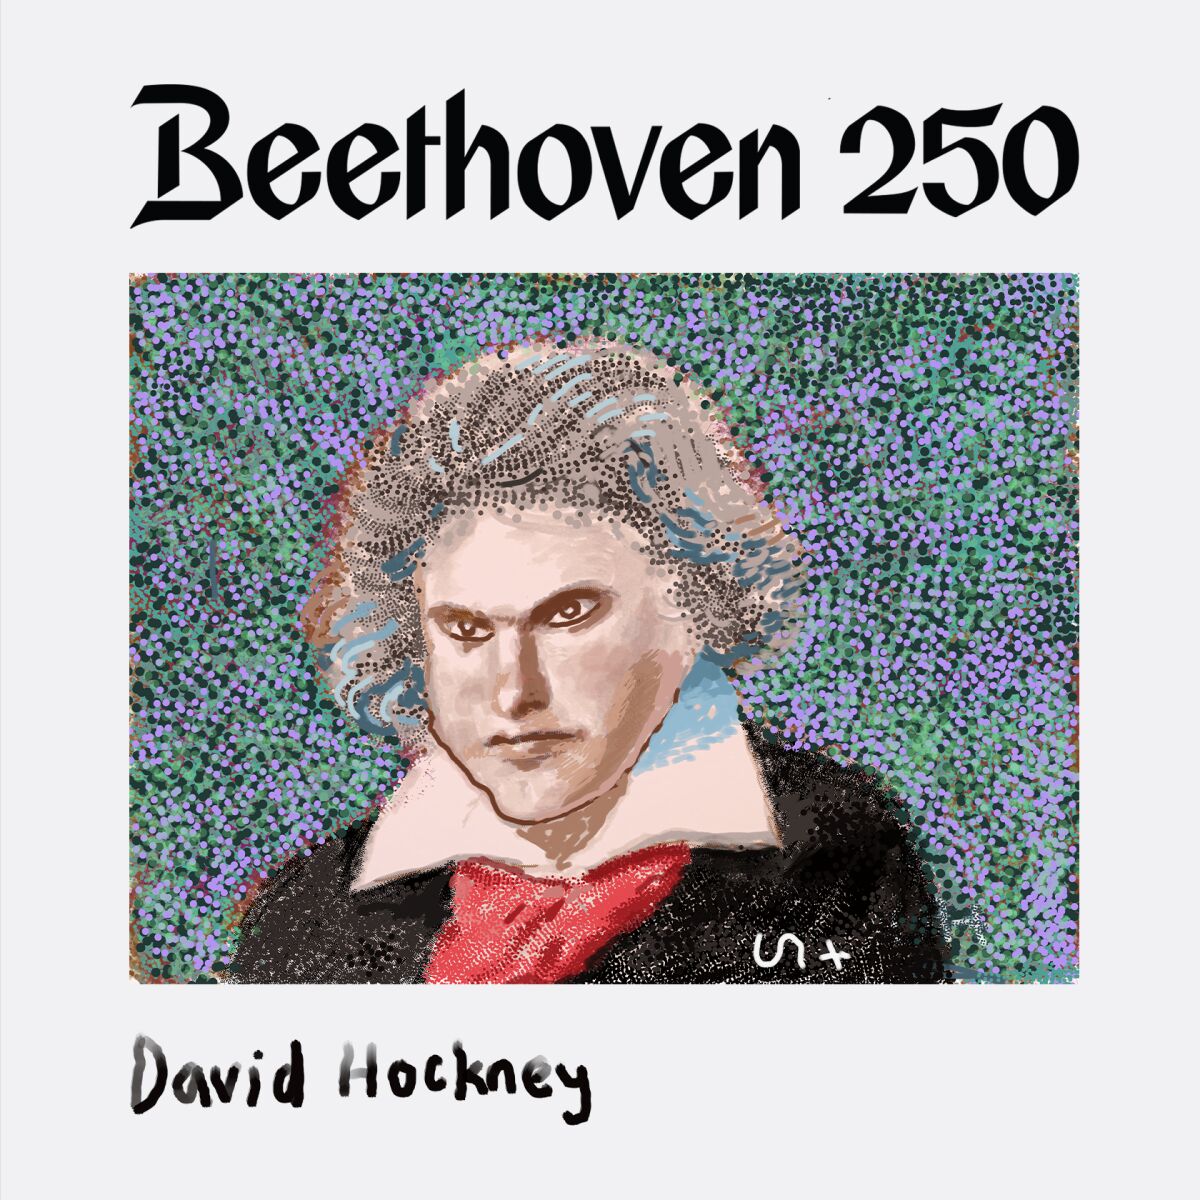 A portrait of Ludwig van Beethoven created by David Hockney on his iPad to celebrate the composer's 250th birthday.